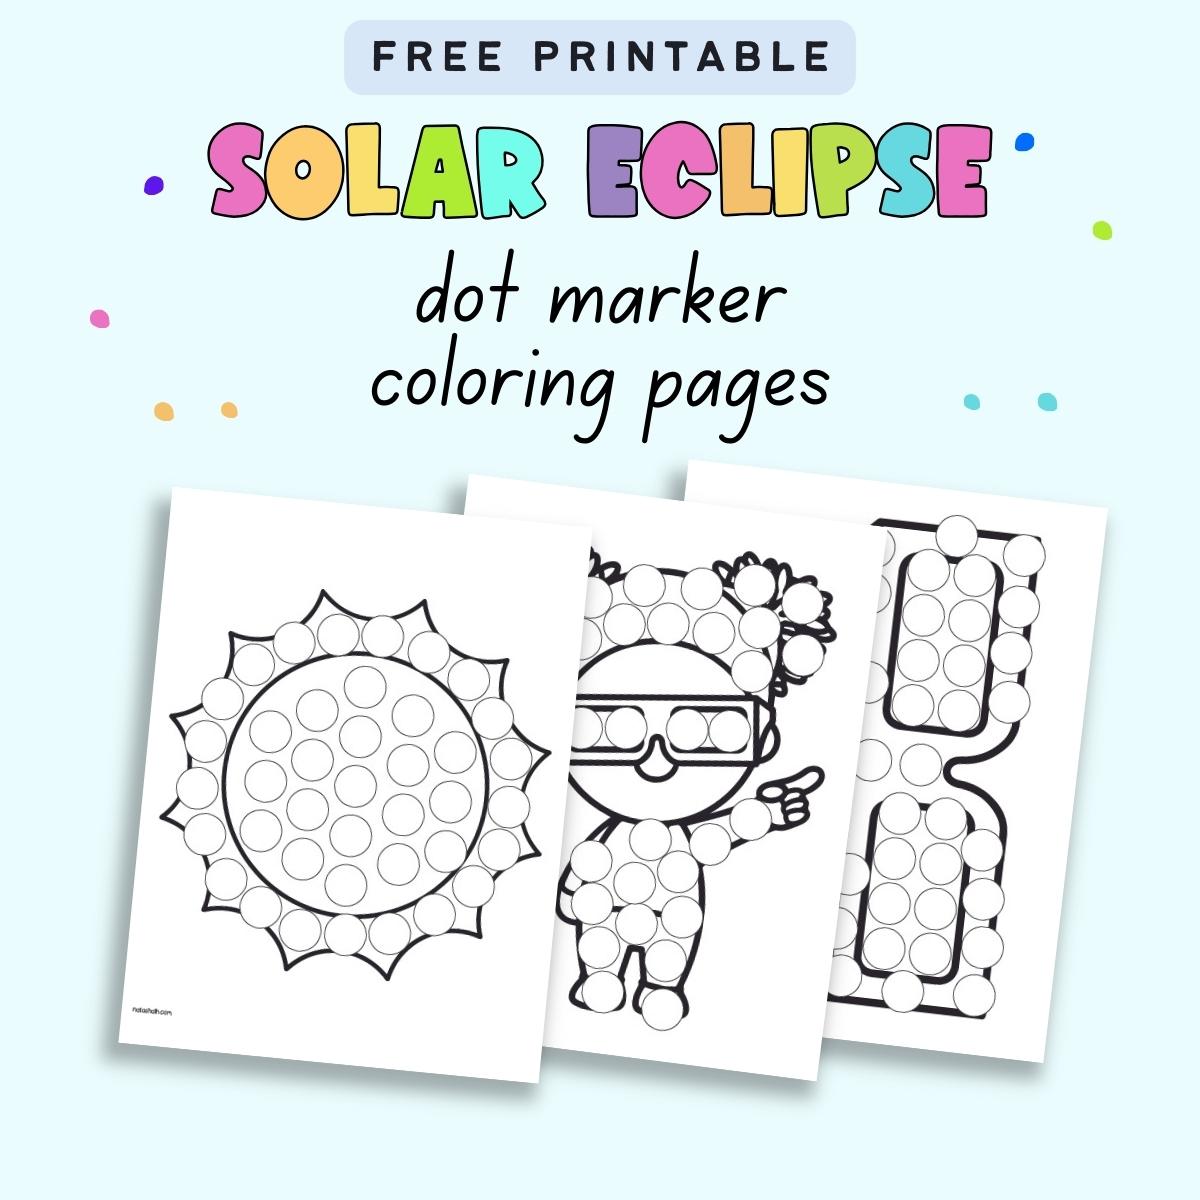 Text "free printable solar eclipse dot marker coloring pages" with a preview of three pages